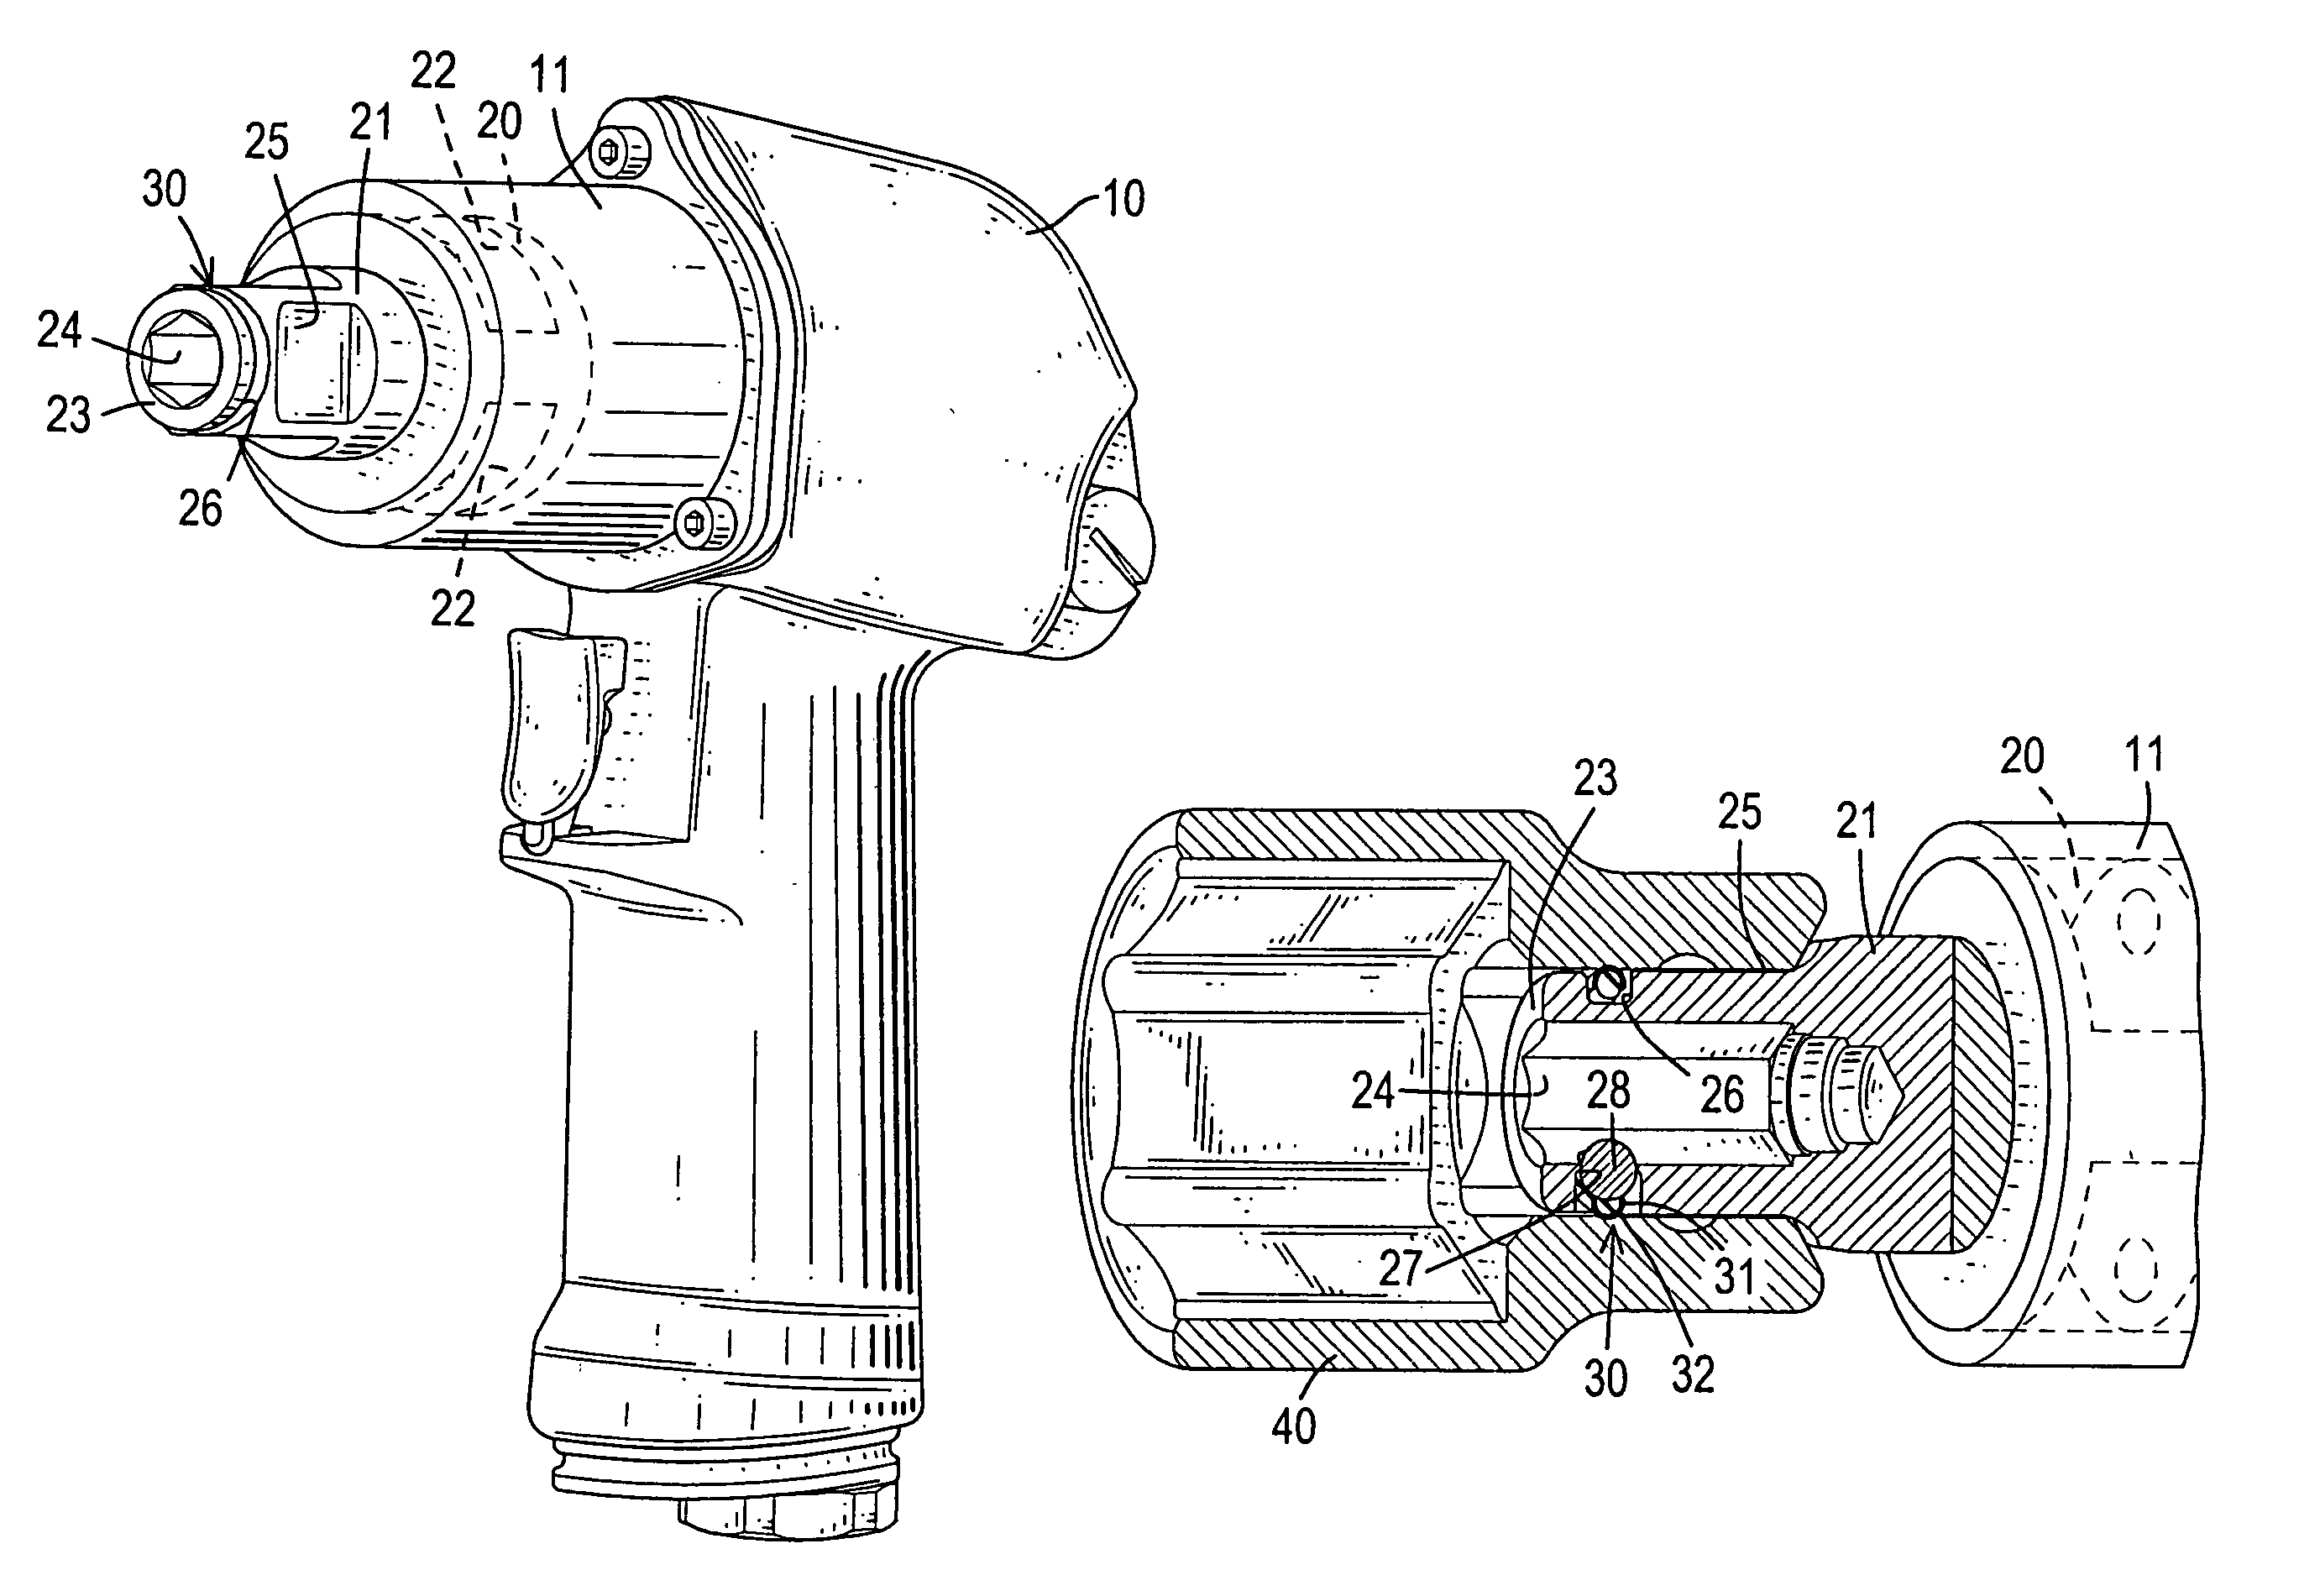 Resilient positioning assembly for an axle in a power tool